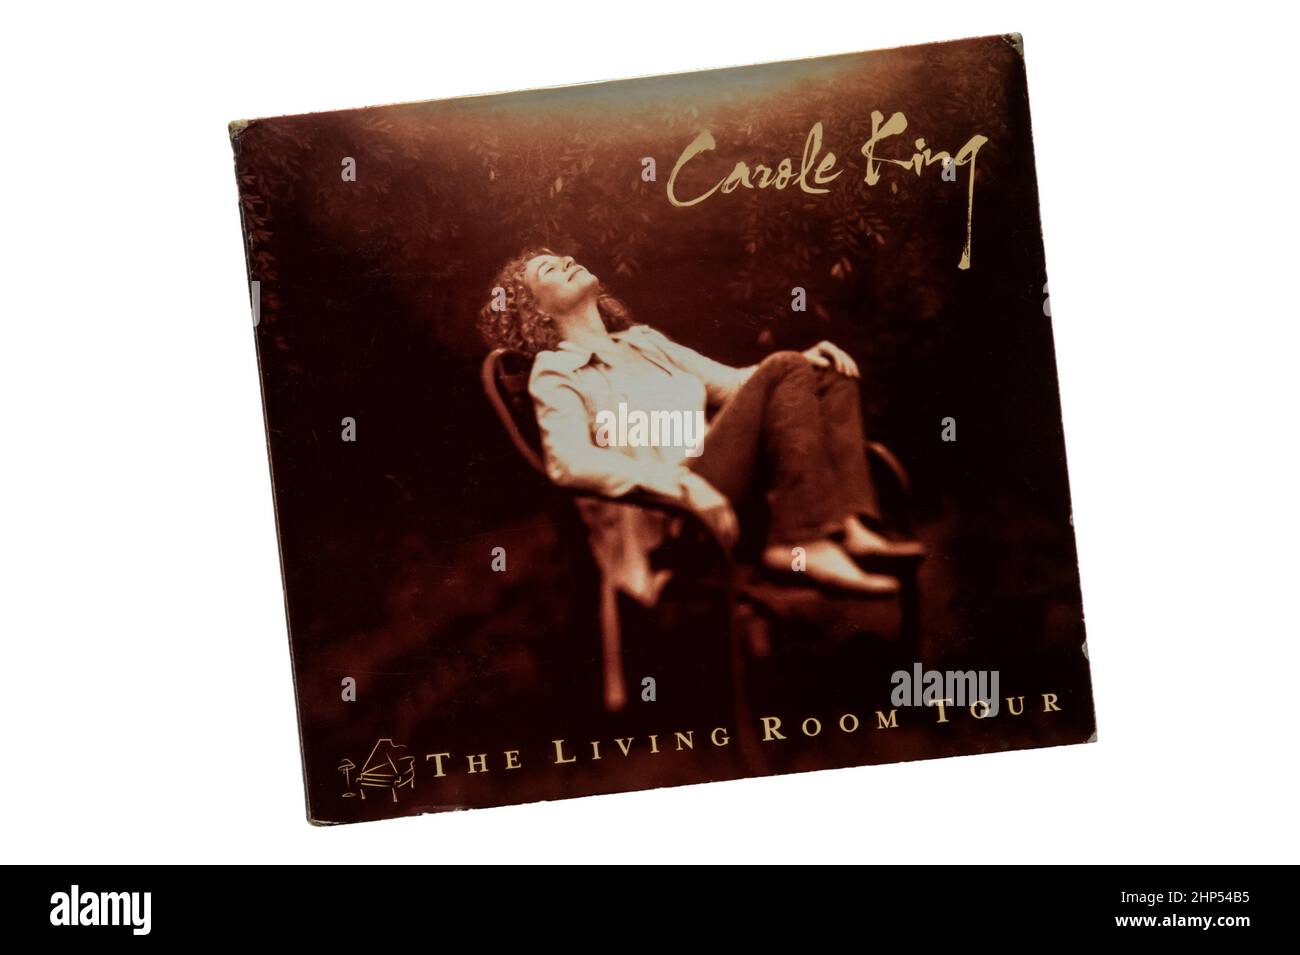 The Living Room Tour was a live album by Carole King released in 2005. Stock Photo